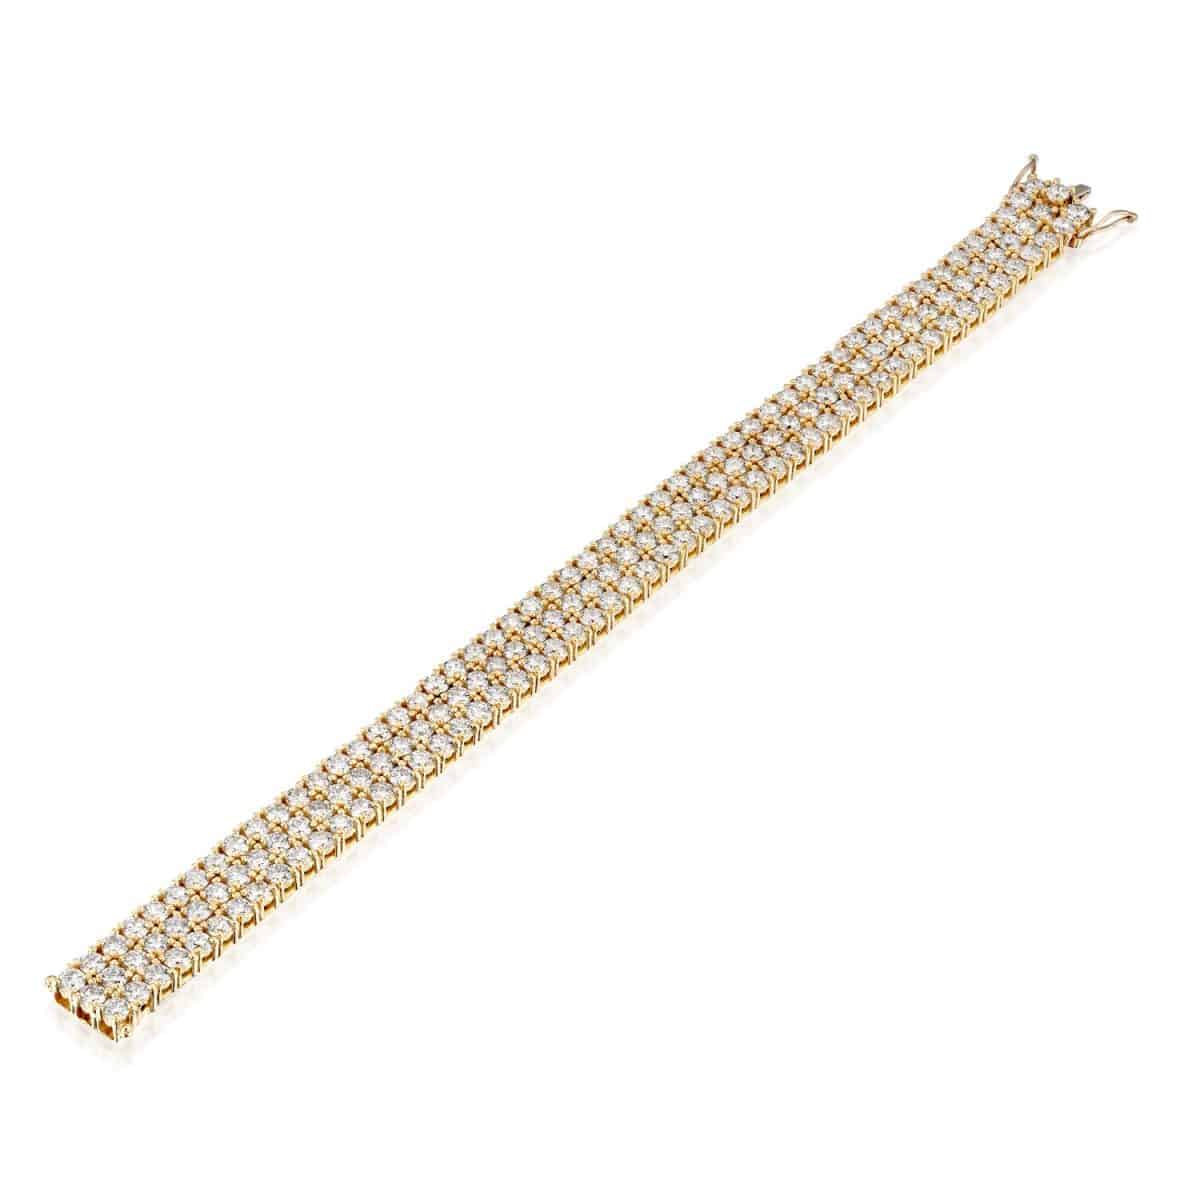 3-row diamond bracelet weighing about 25 carats